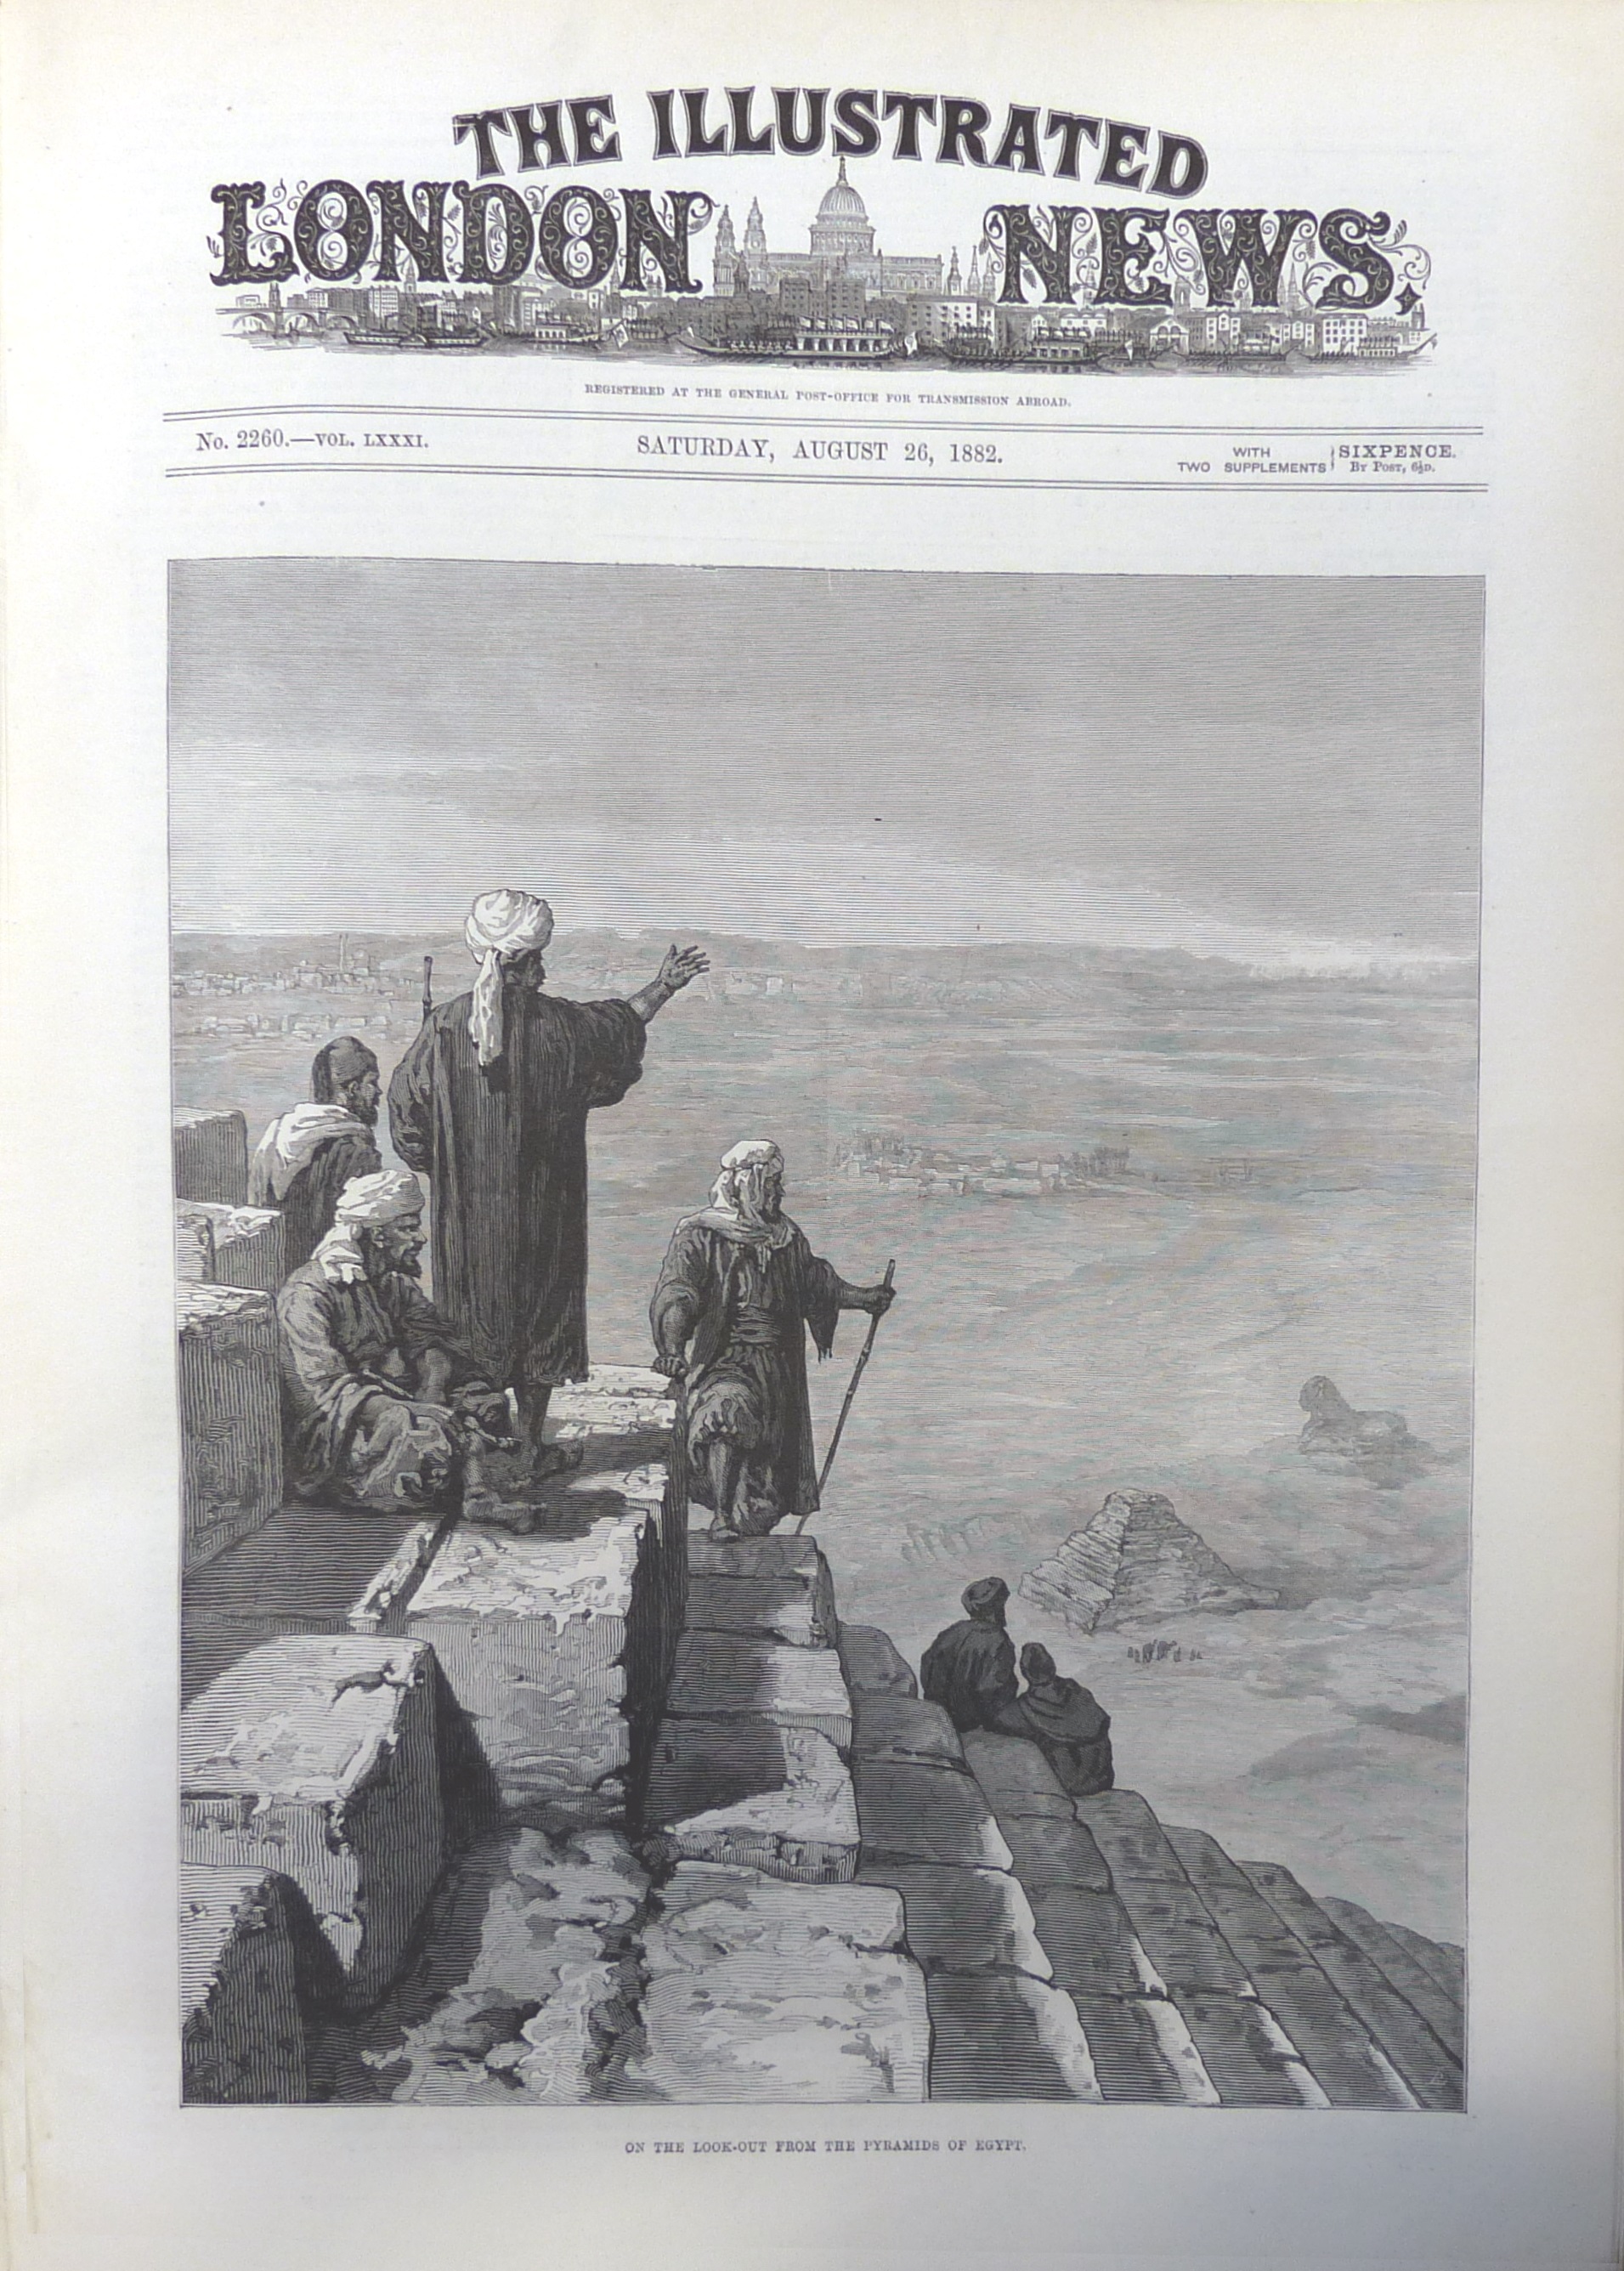 ‘On the look-out from the pyramids of Egypt’. The Illustrated London News vol. 81, no. 2260, 26 August 1882, p. 213. CUL NPR.c.313.